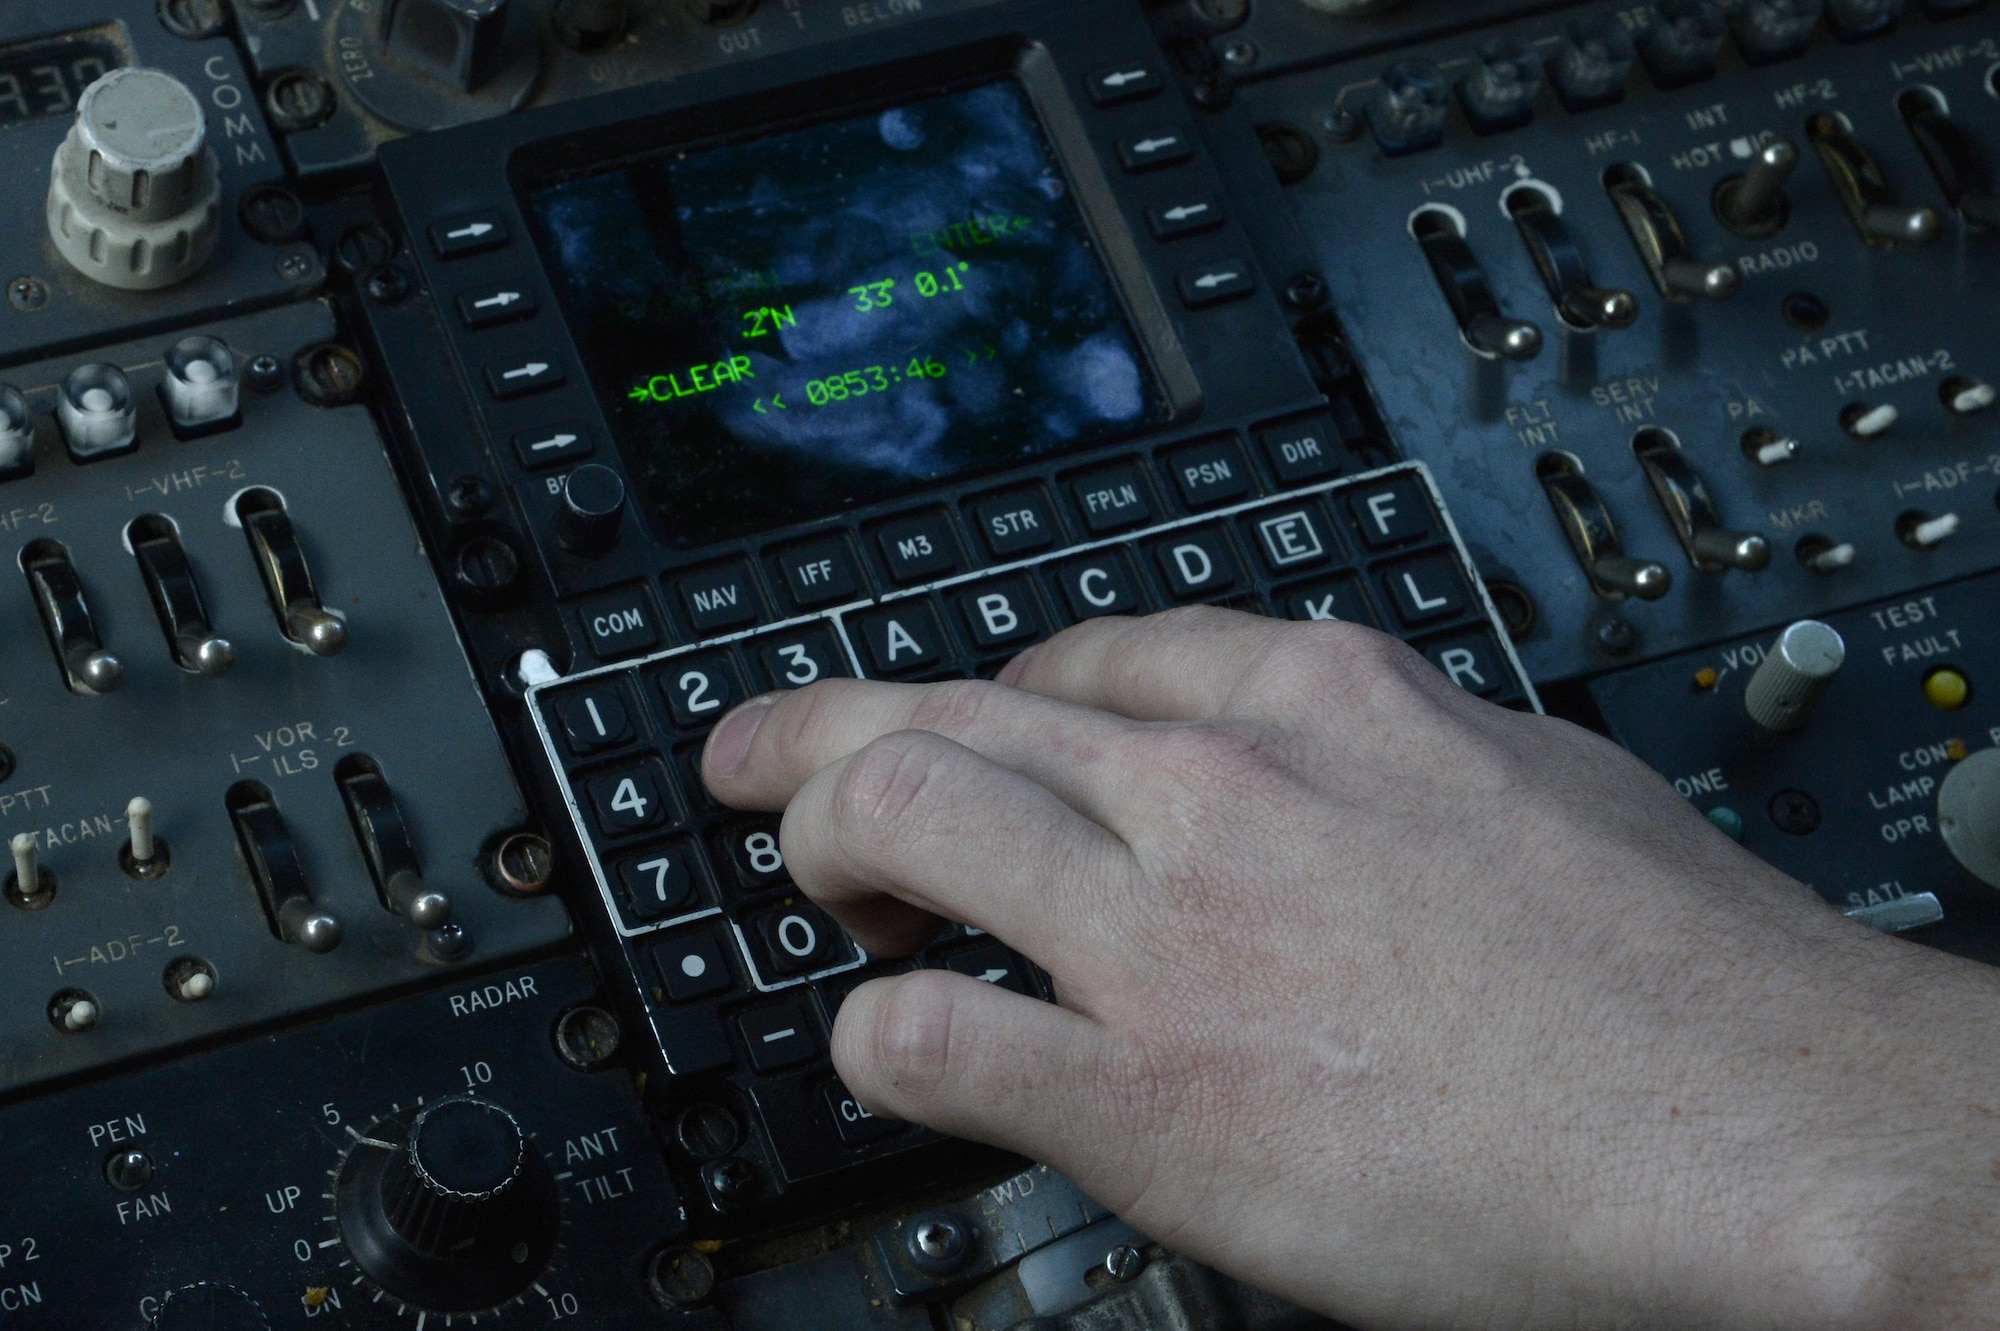 Senior Airman Will, KC-10 Extender instrument and flight control systems technician, performs a preflight inspection on a KC-10 Extender at an undisclosed location in Southwest Asia Feb. 2, 2015. Airmen in the Extender Aircraft Maintenance Unit go out thirty minutes before flight to get power going, check all necessary lights for both flight and refueling operations. Will is deployed from Travis AFB, Calif., and is a native of Glendale, Ariz. (U.S. Air Force photo/Tech. Sgt. Marie Brown)